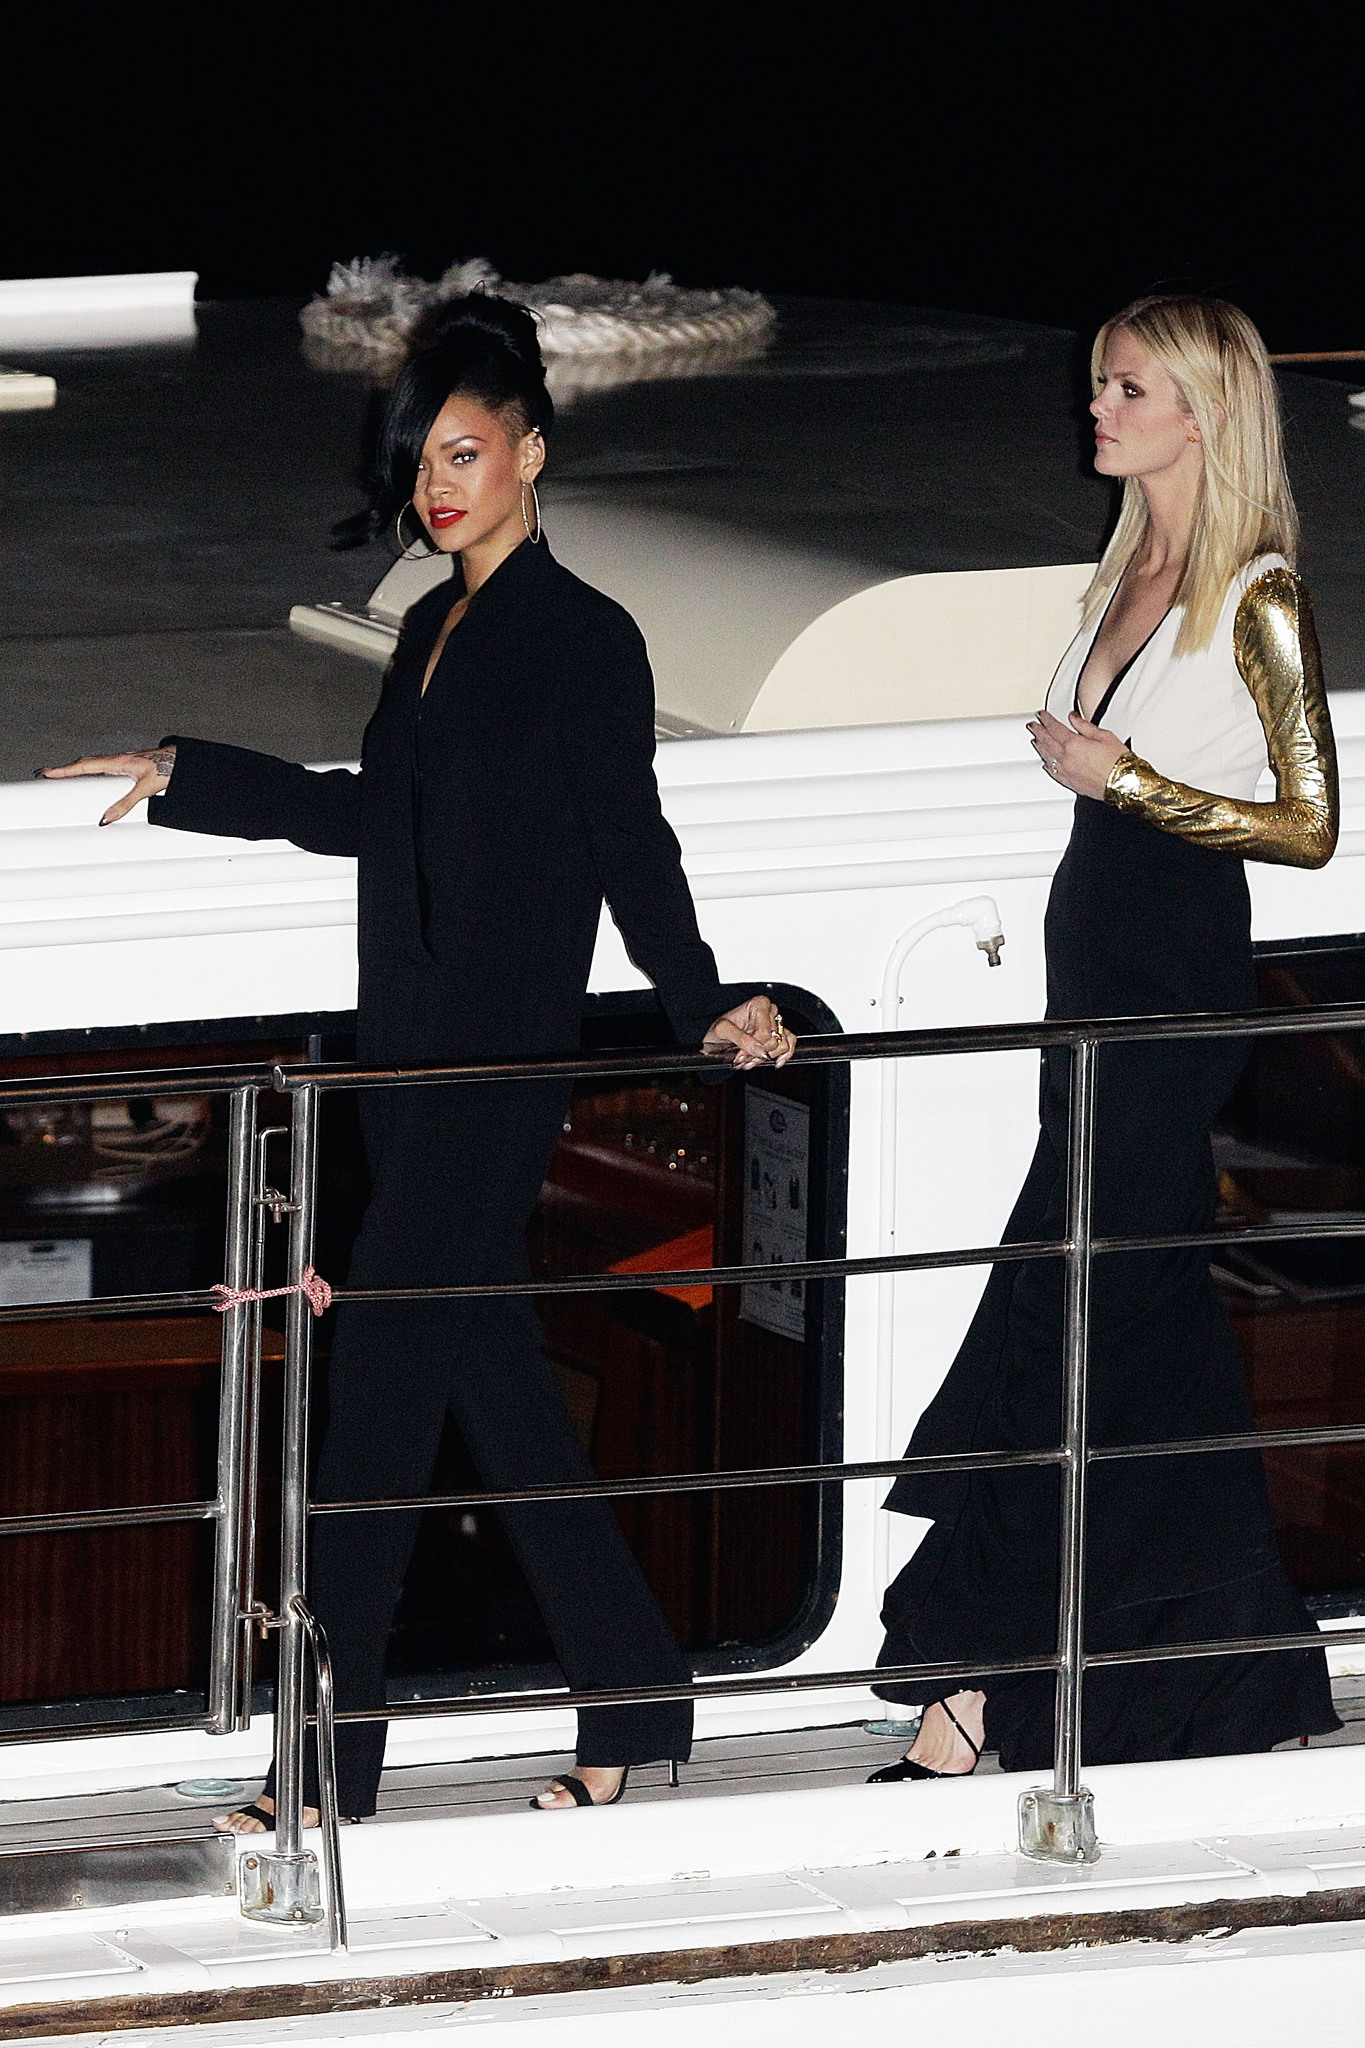 Rihanna and Brooklyn Decker at event of Laivu musis (2012)